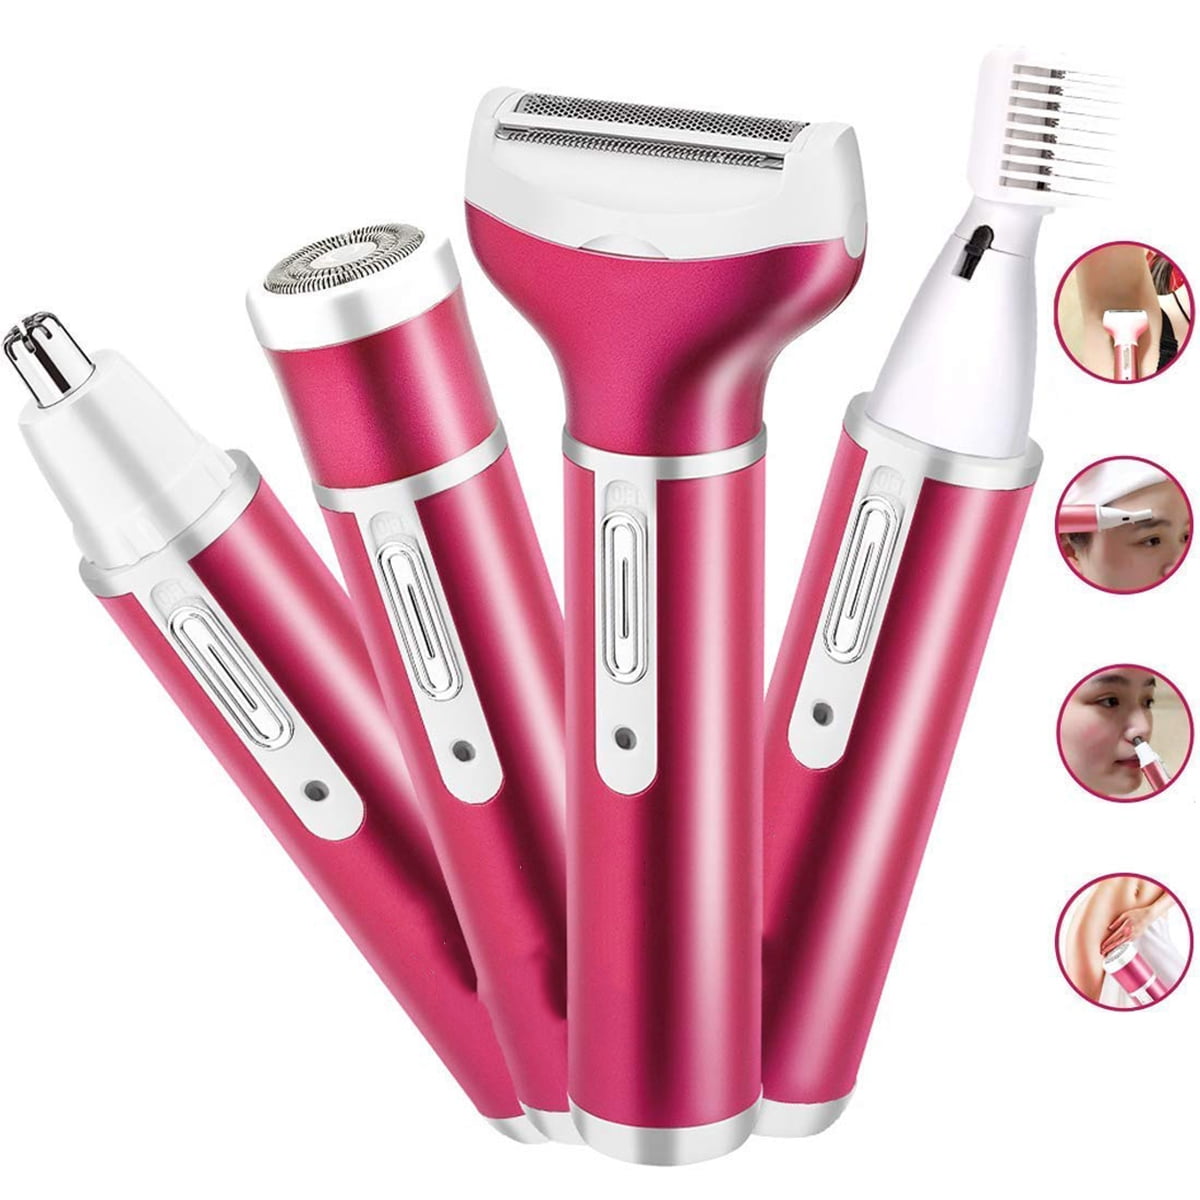 4 in 1 Hair Removal for Women Electric Shaver Ladies Razor Hair Remover Epilator USB Rechargeable Cordless for Face Nose Eyebrows Bikini Armpit Leg Body Hair Trimmer